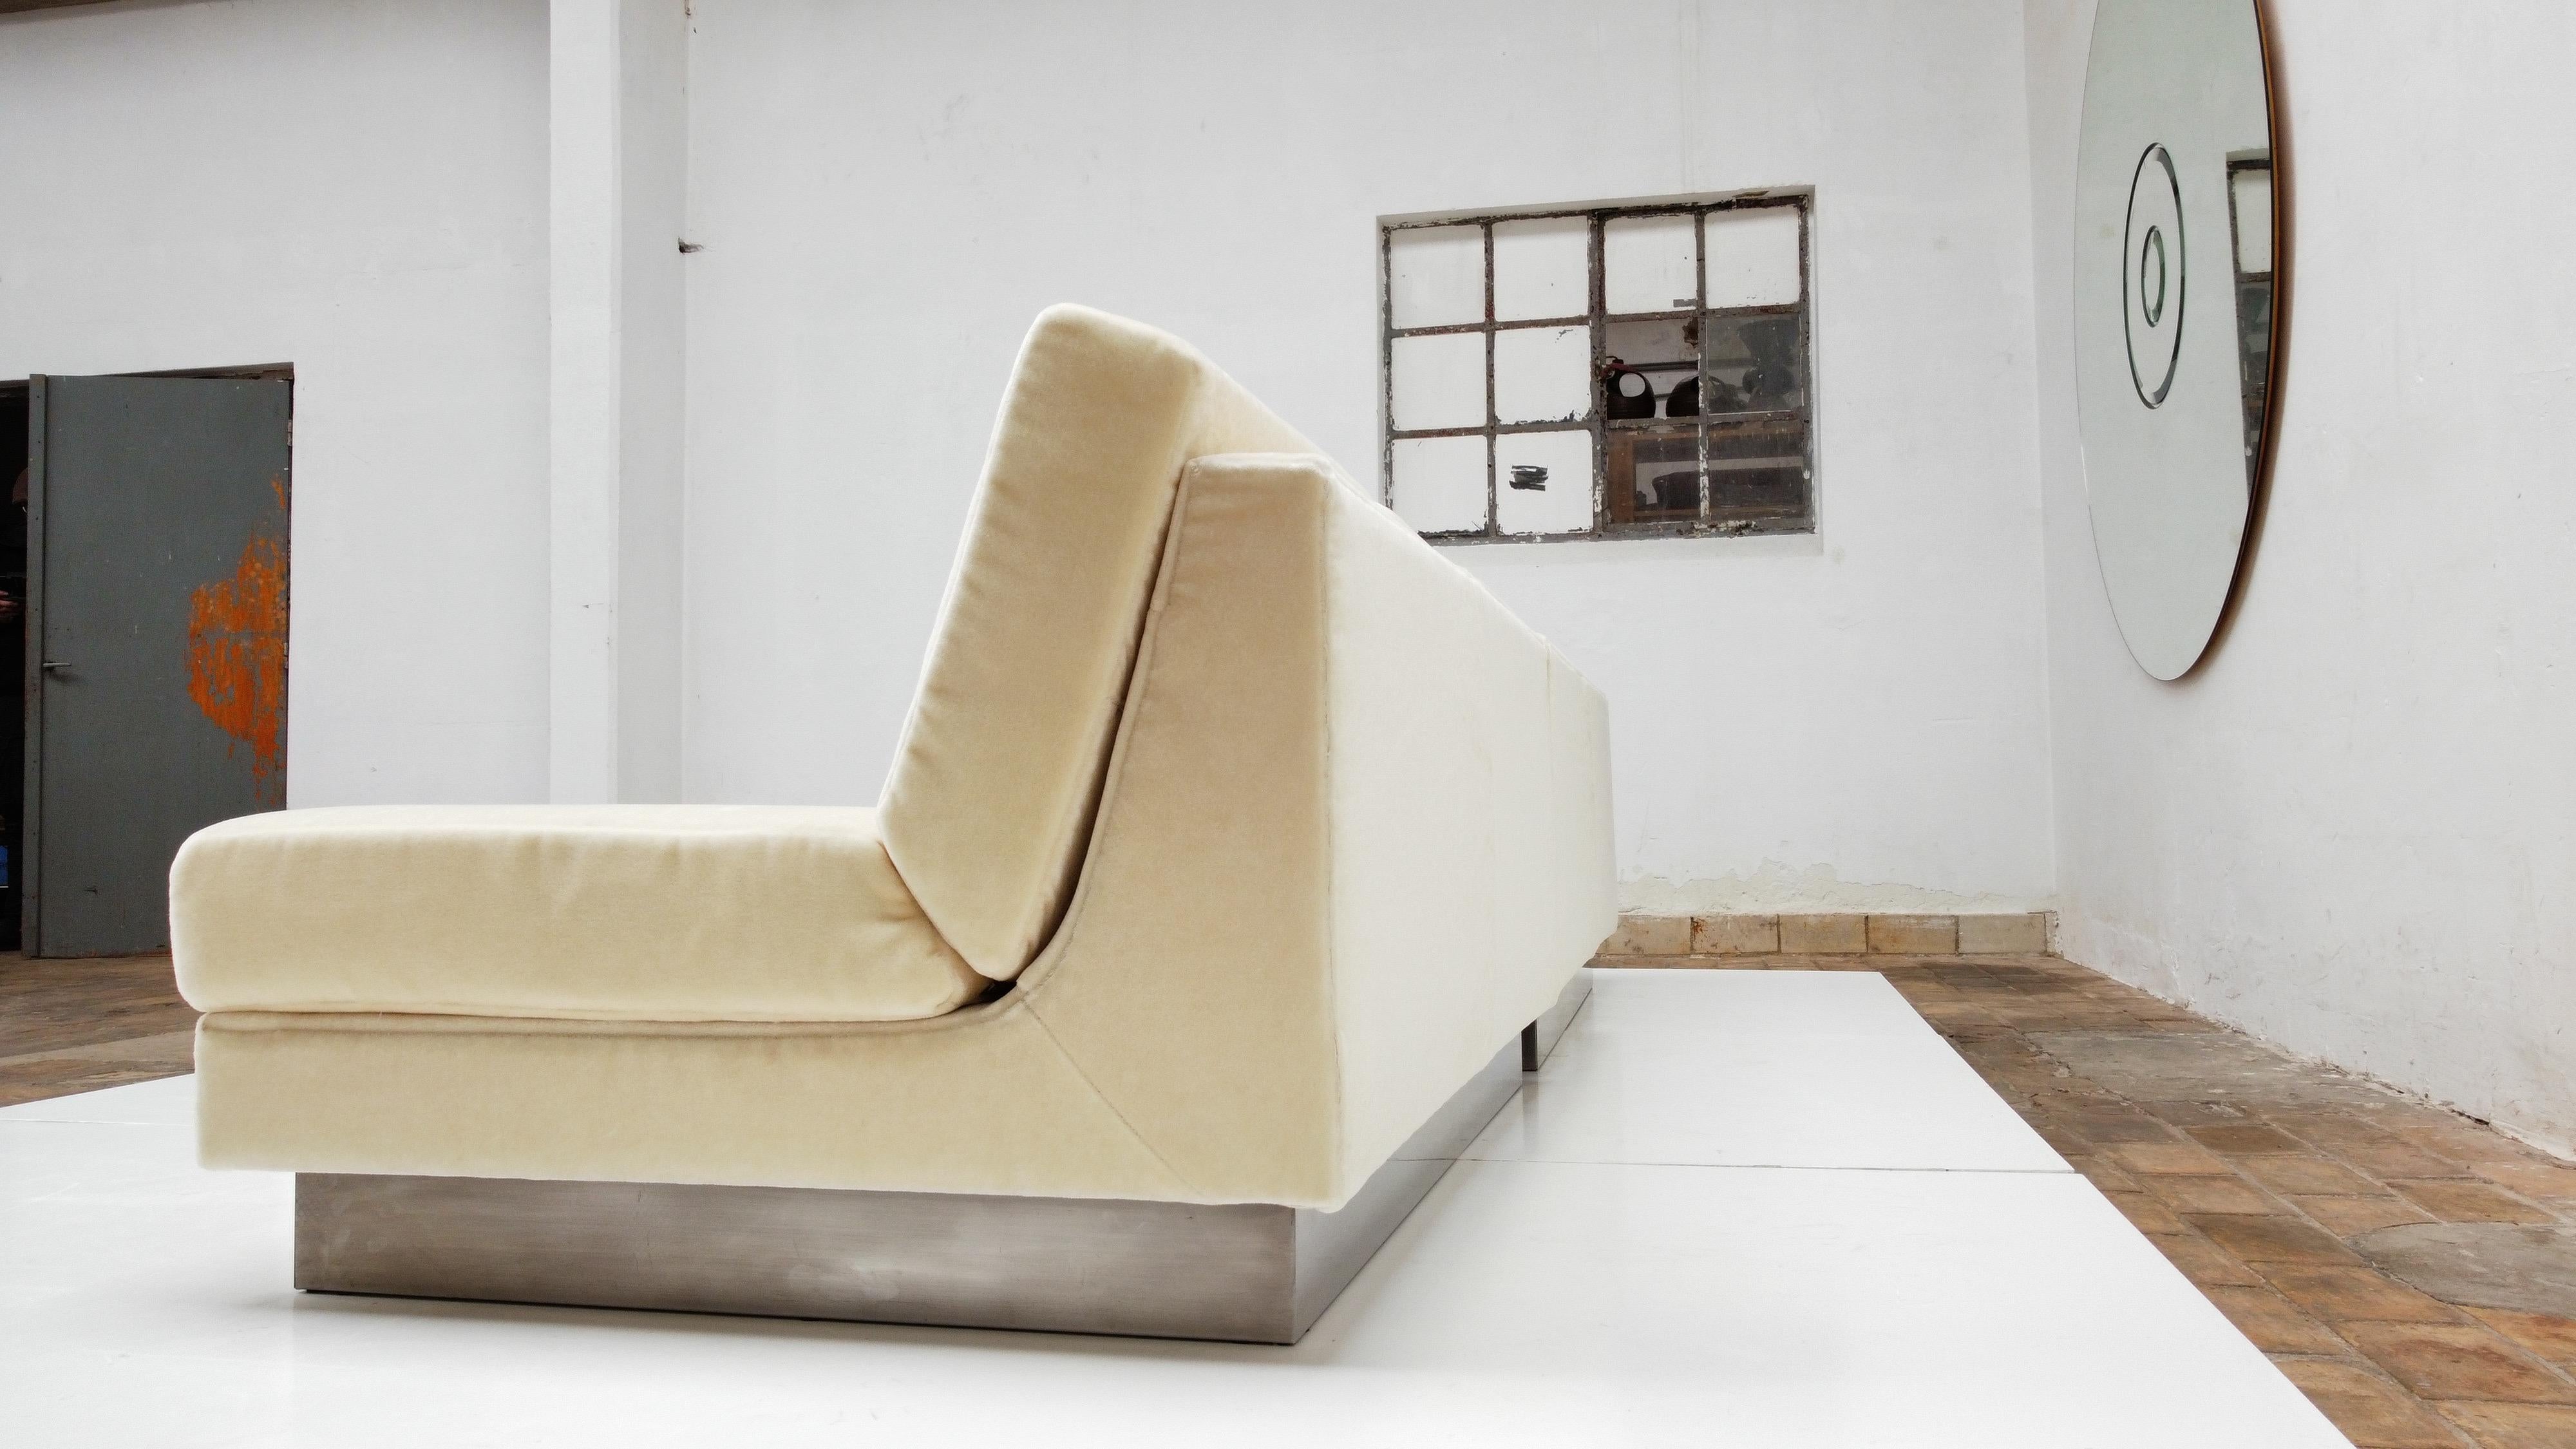 Pair of Two Seat Mohair 'California' Sofas, Jacques Charpentier, Paris, 1970 For Sale 8